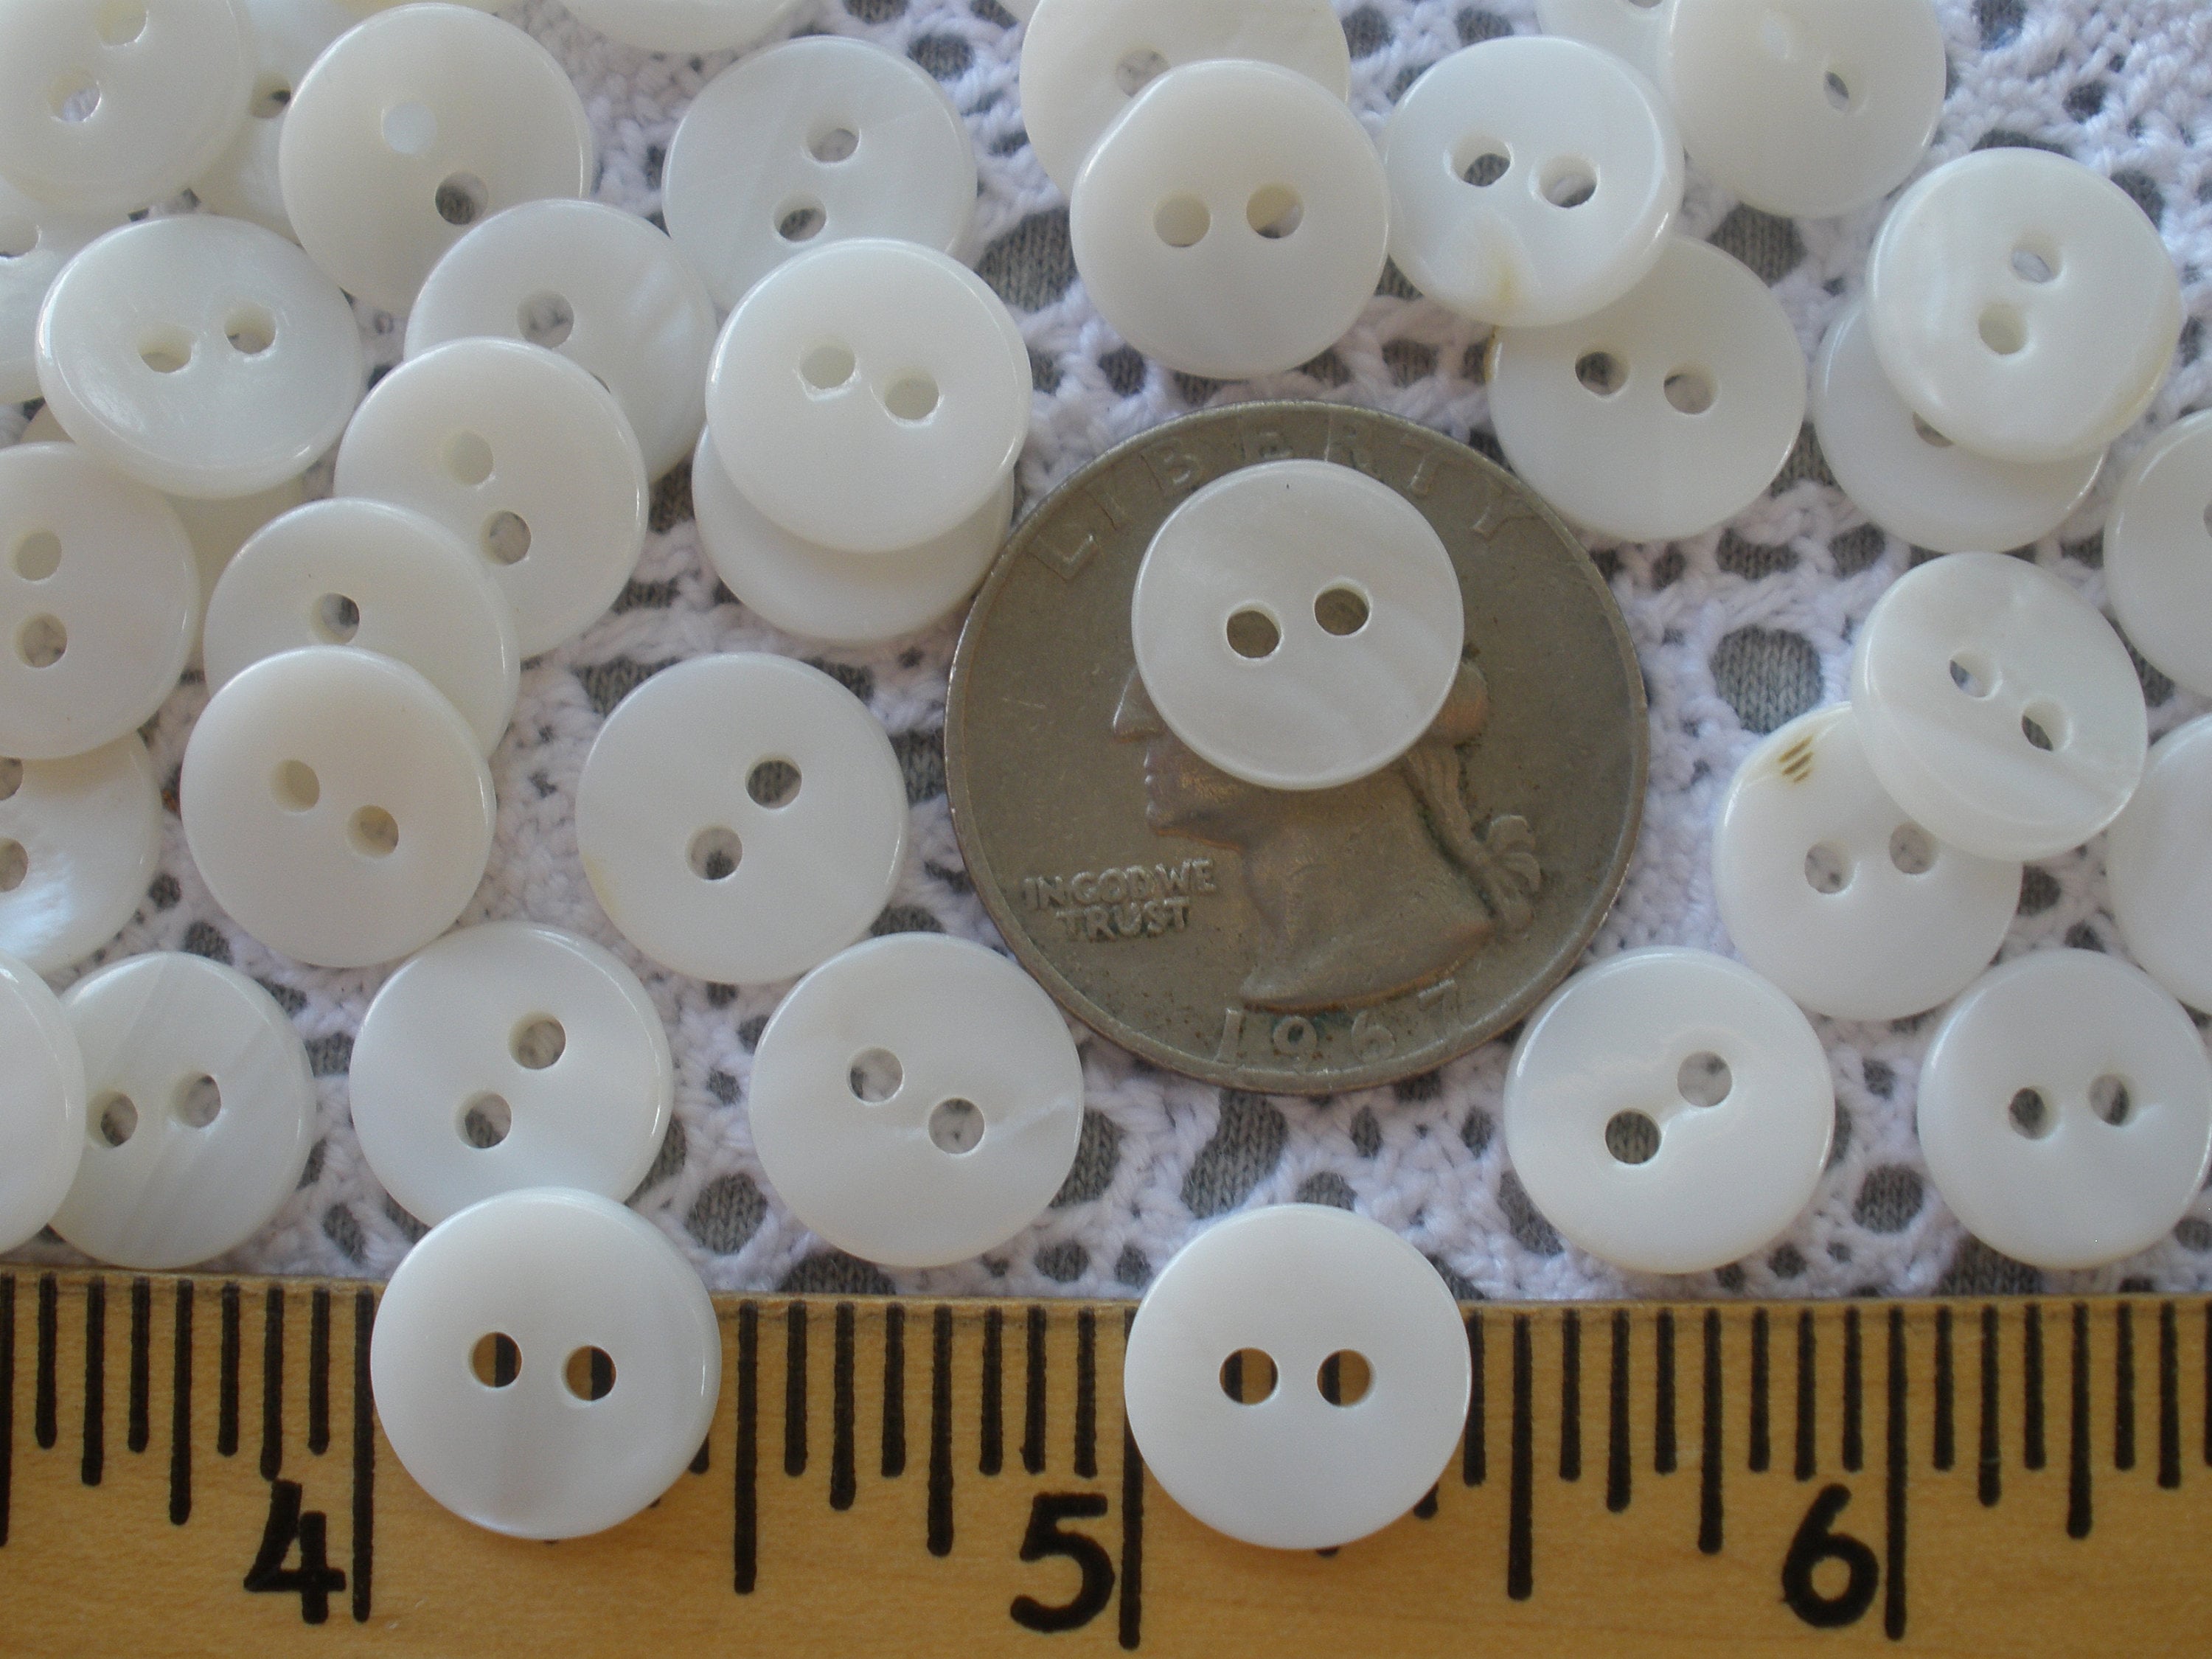 Freshwater Mother Of Pearl Button: 60L (38mm or 1.5)